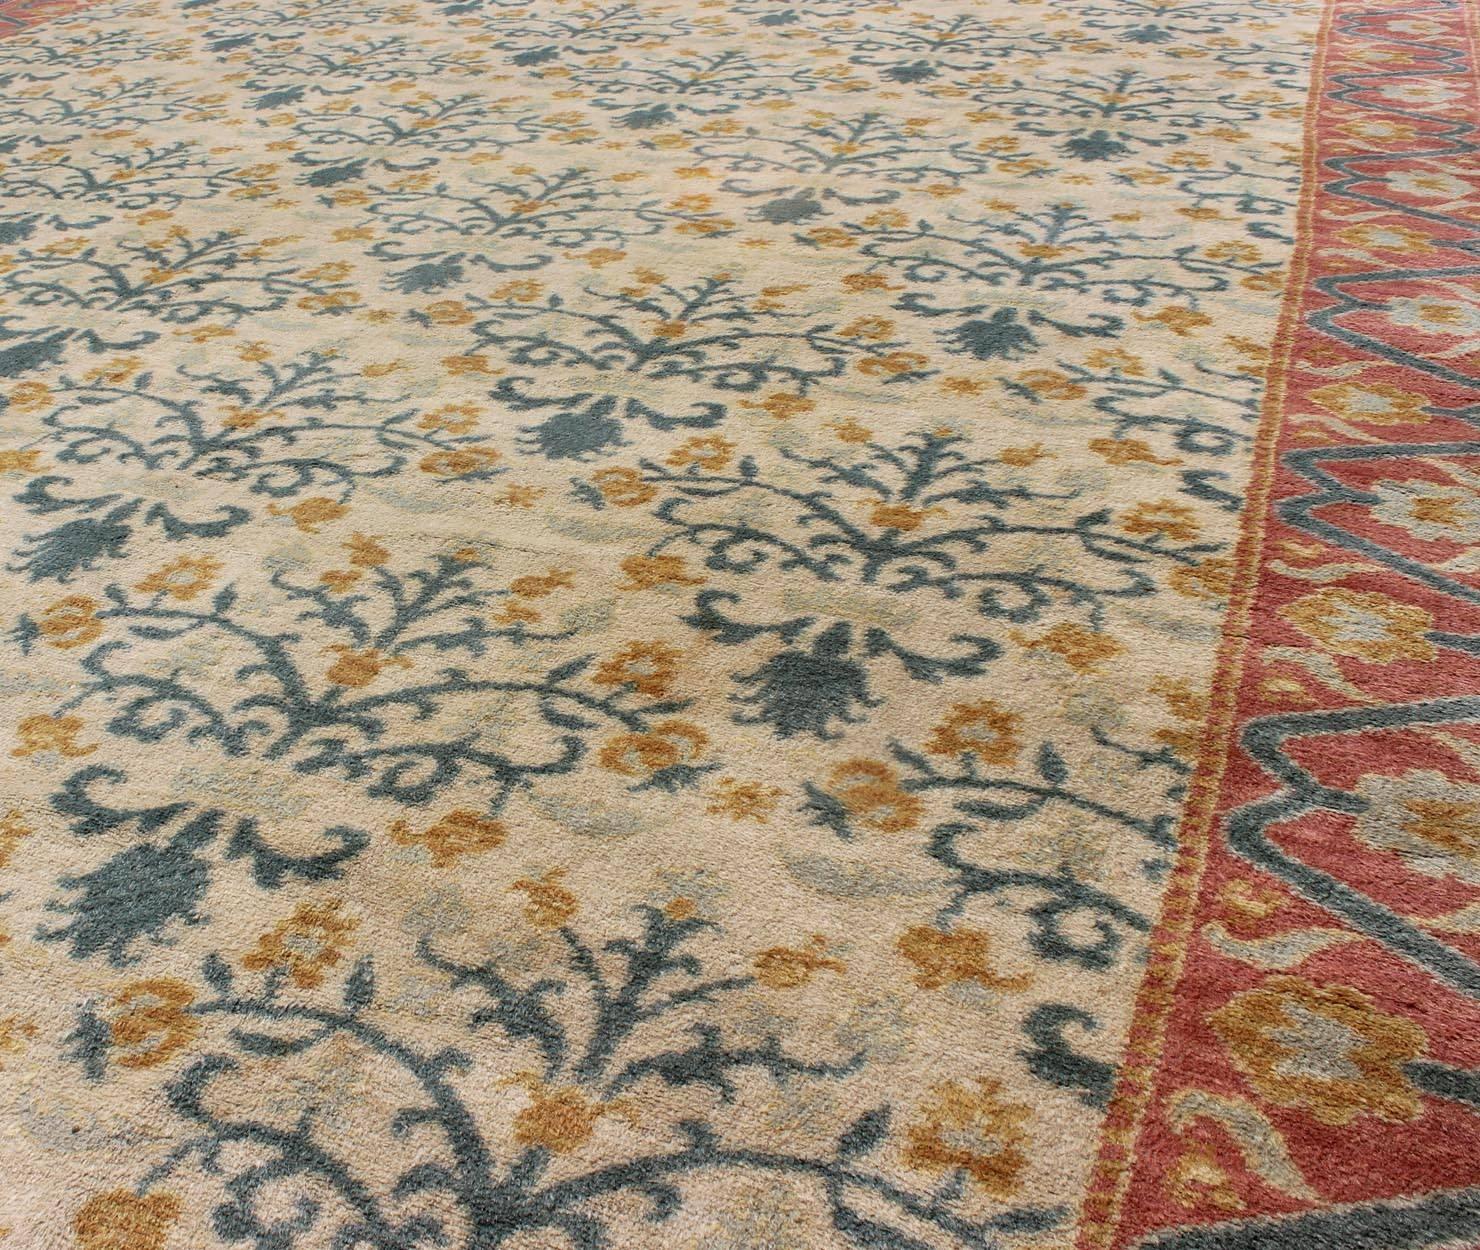 Early 20th Century Large and Colorful Antique Spanish Rug with All-Over Design in Coral  and cream